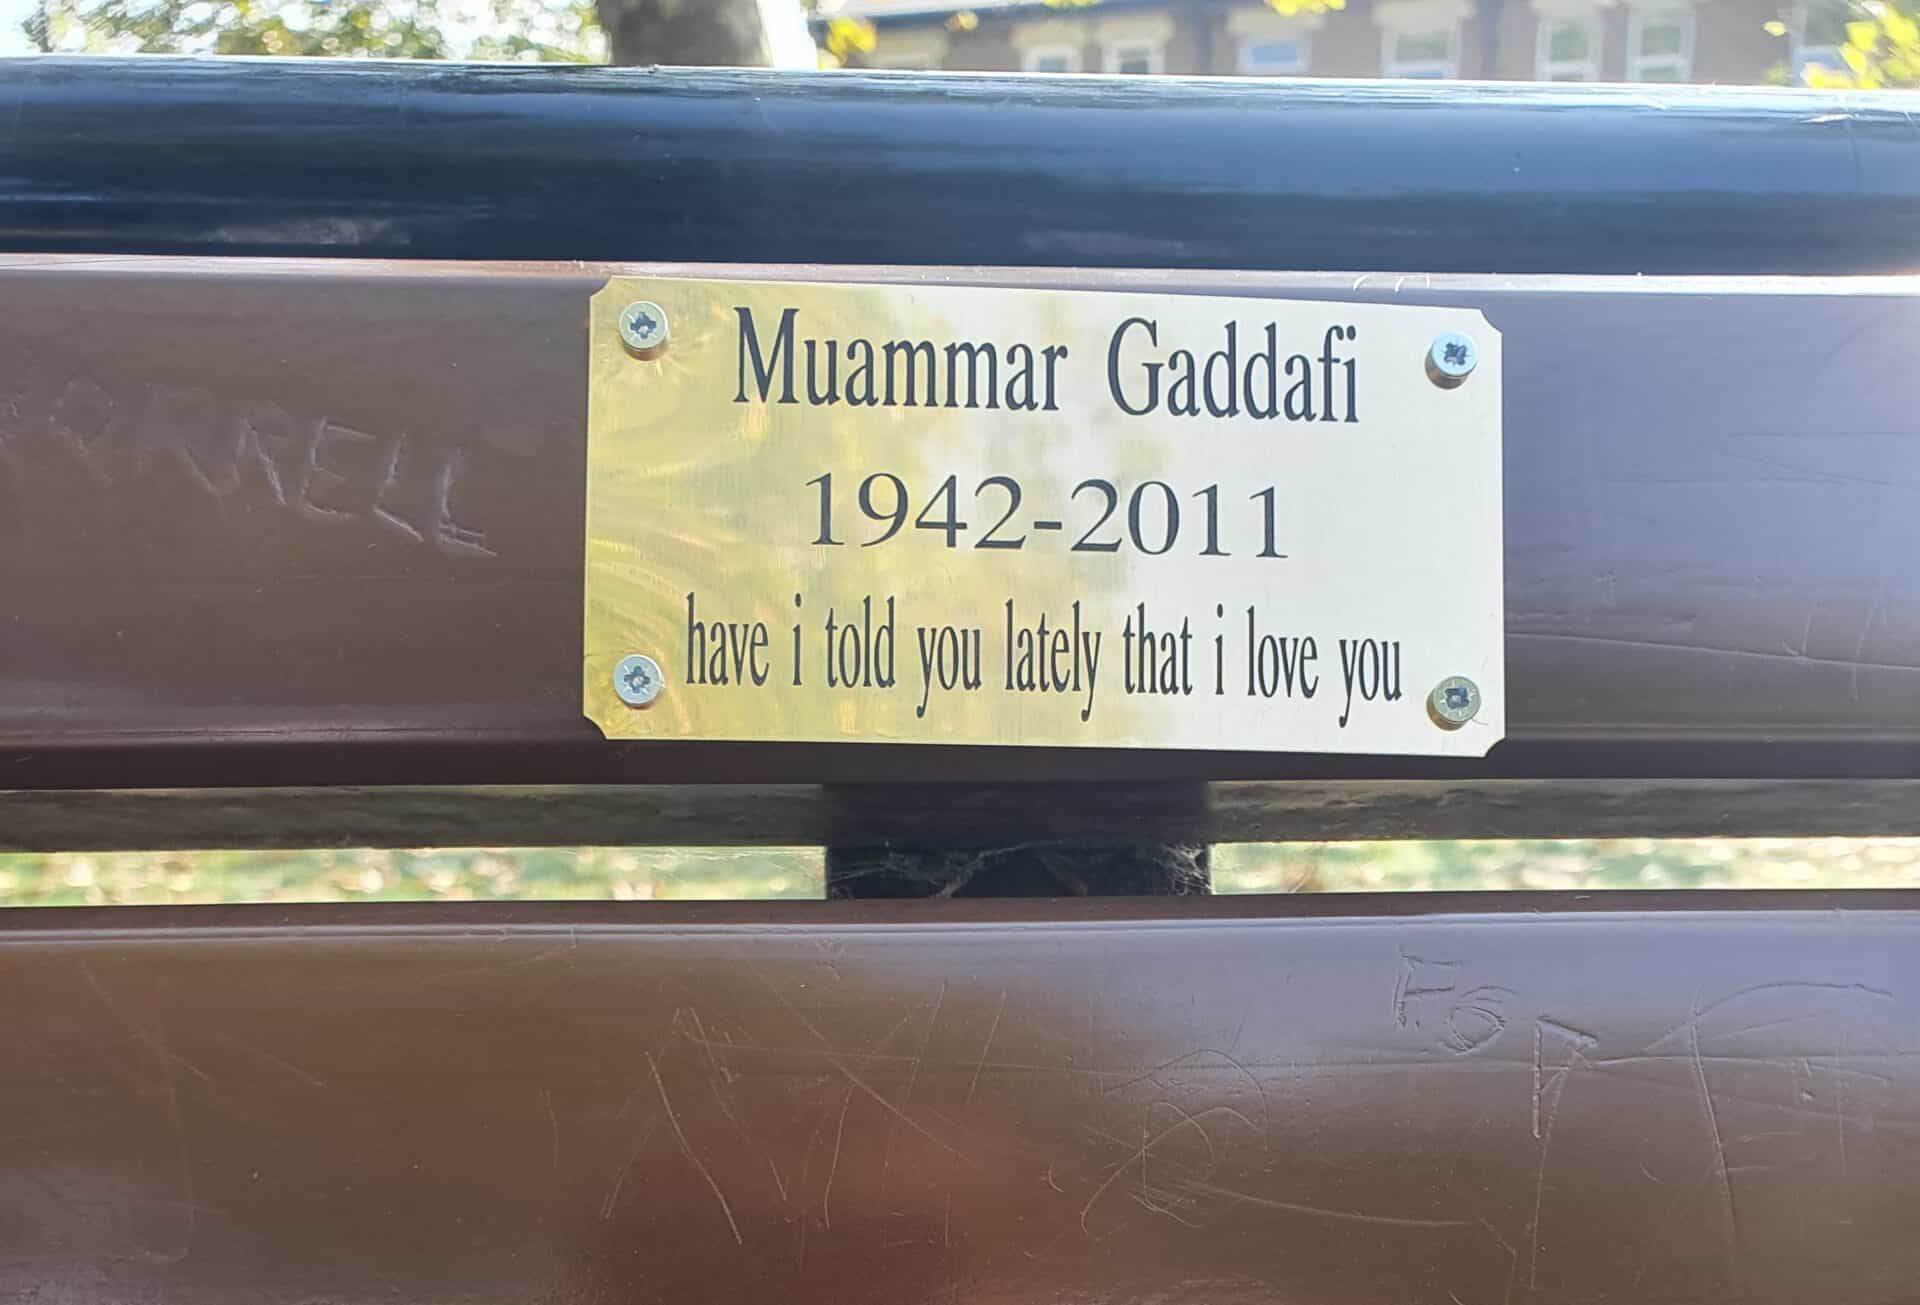 One of the plaques appears to be dedicated to Libyan despot, Colonel Gaddafi